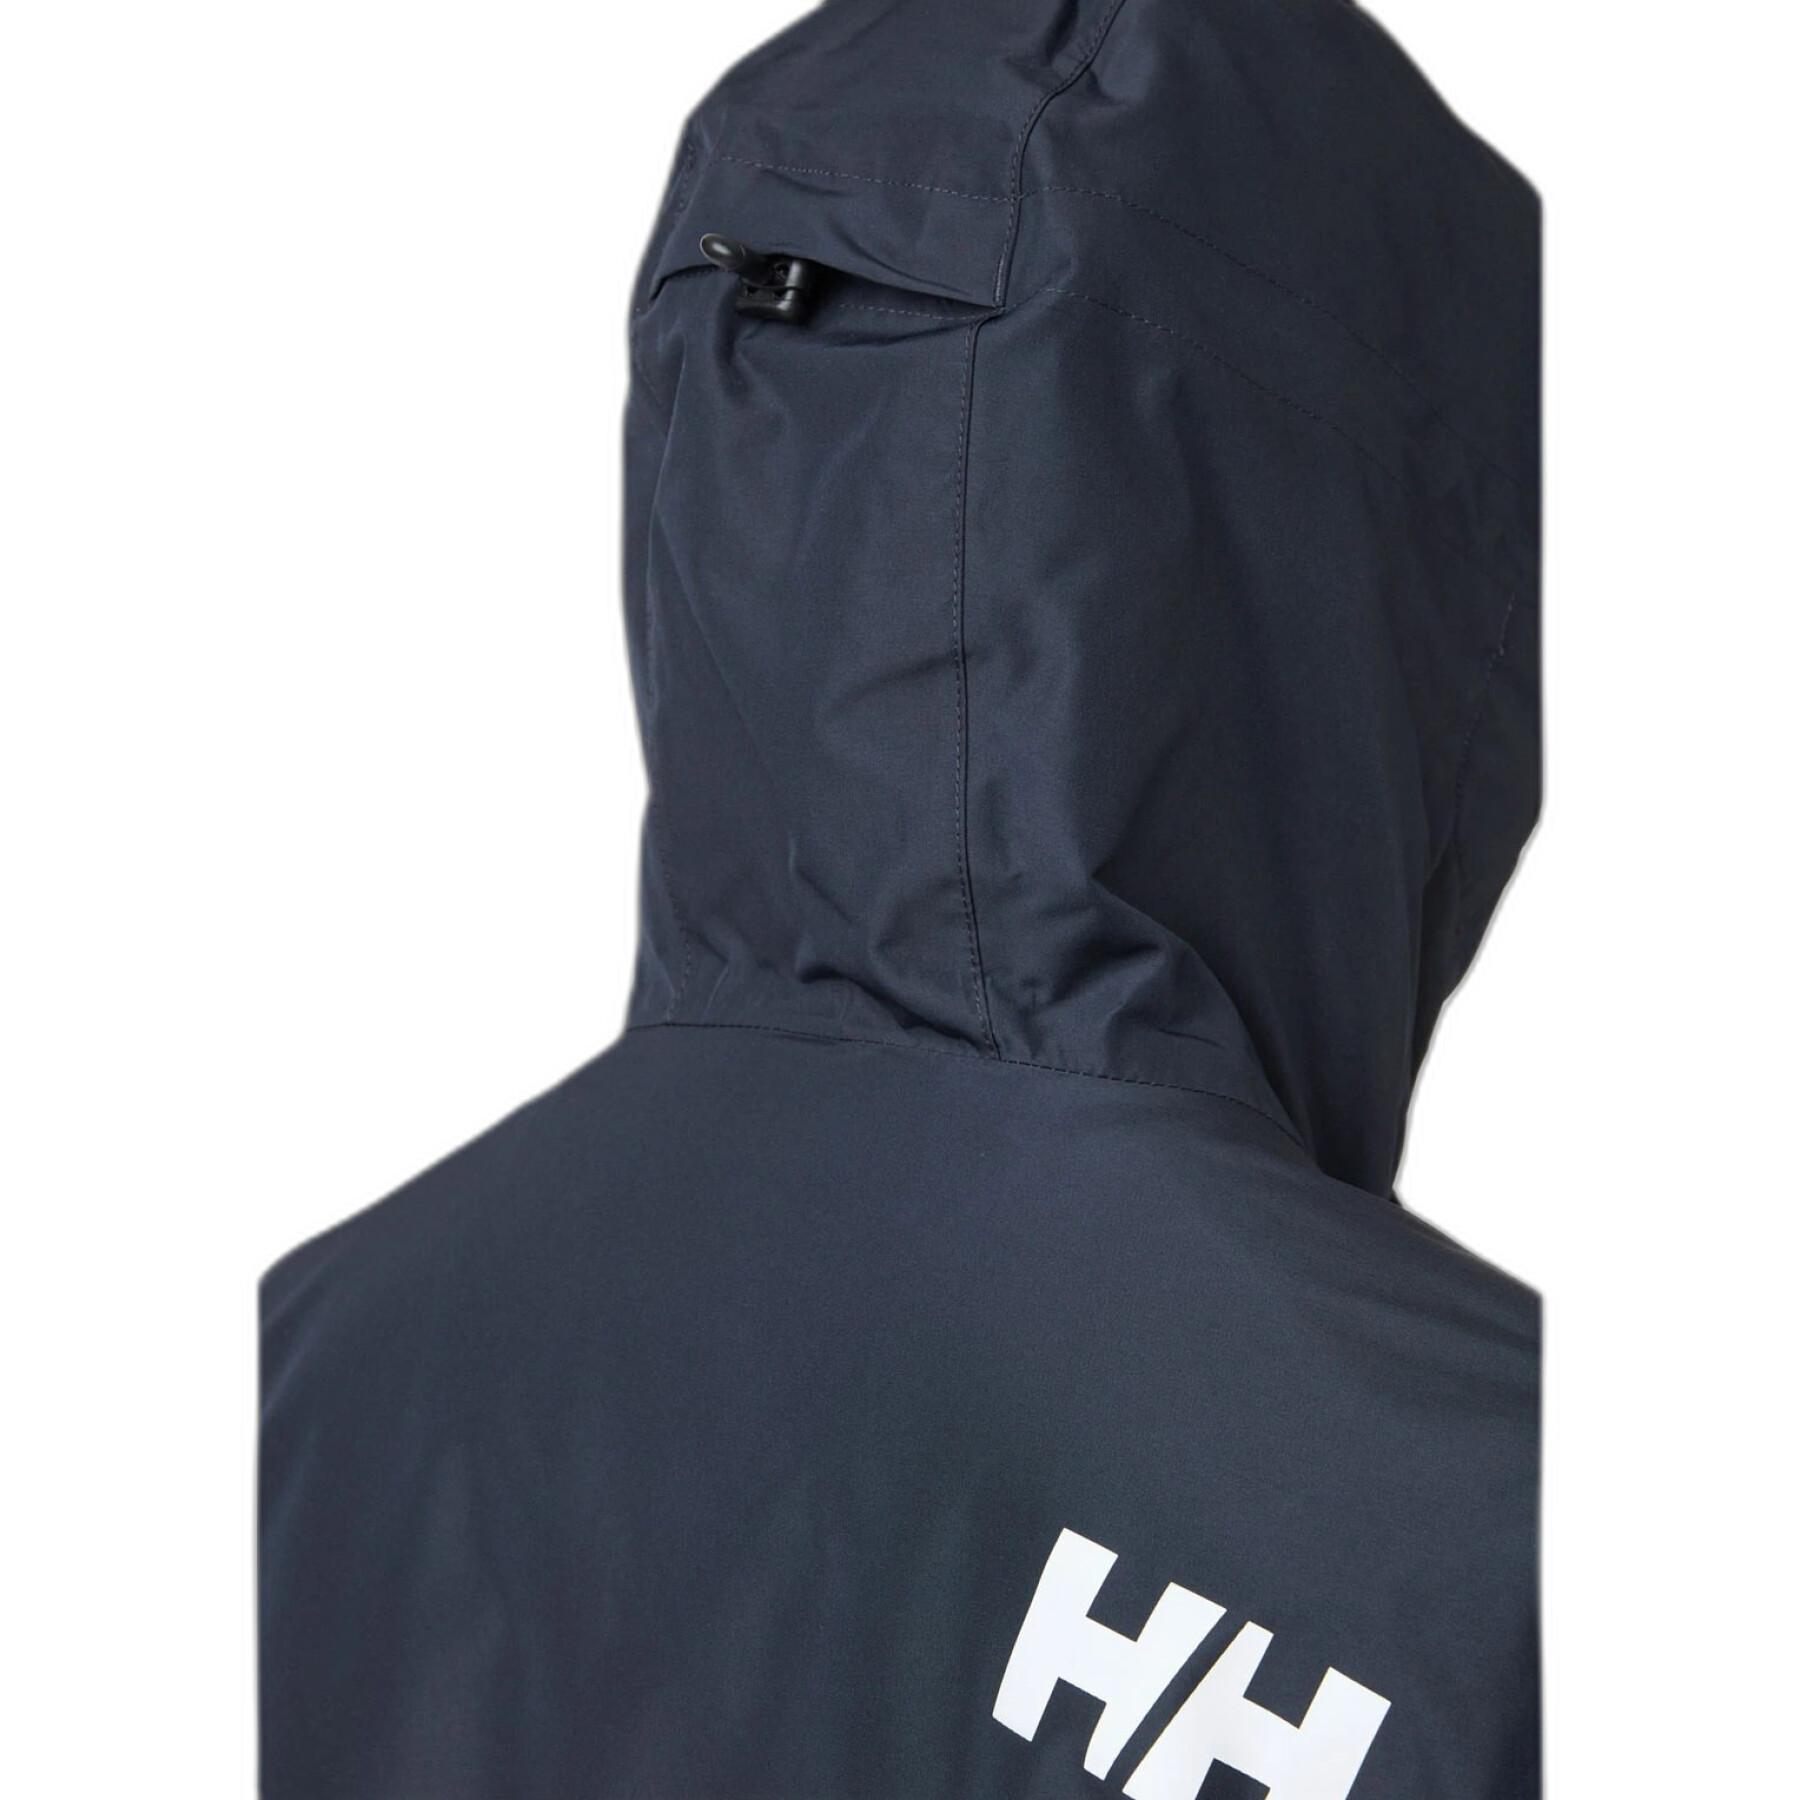 Giacca impermeabile Helly Hansen Rigging